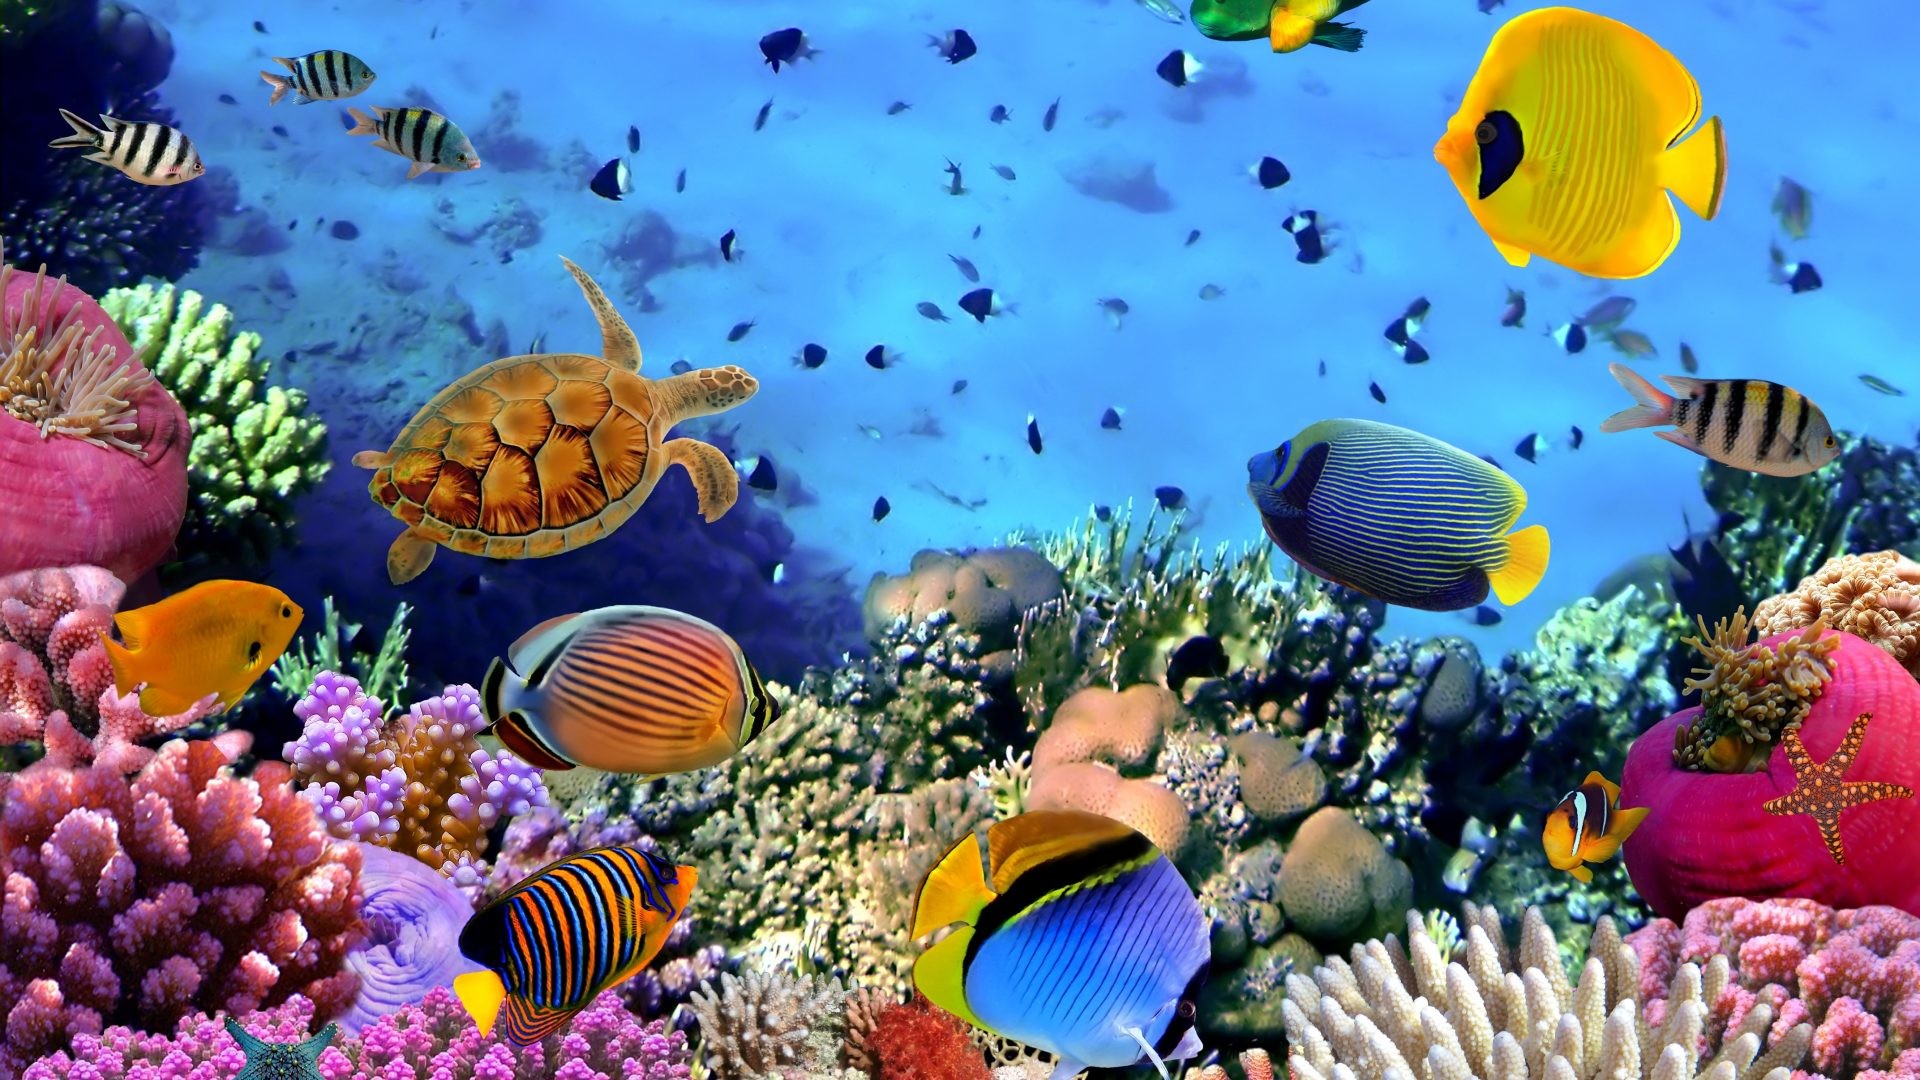 1920x1080 Reef Tag - Tropical Coral Reefs Ocean Reef Fishes Underwater Wallpaper  Pictures Free for HD 16